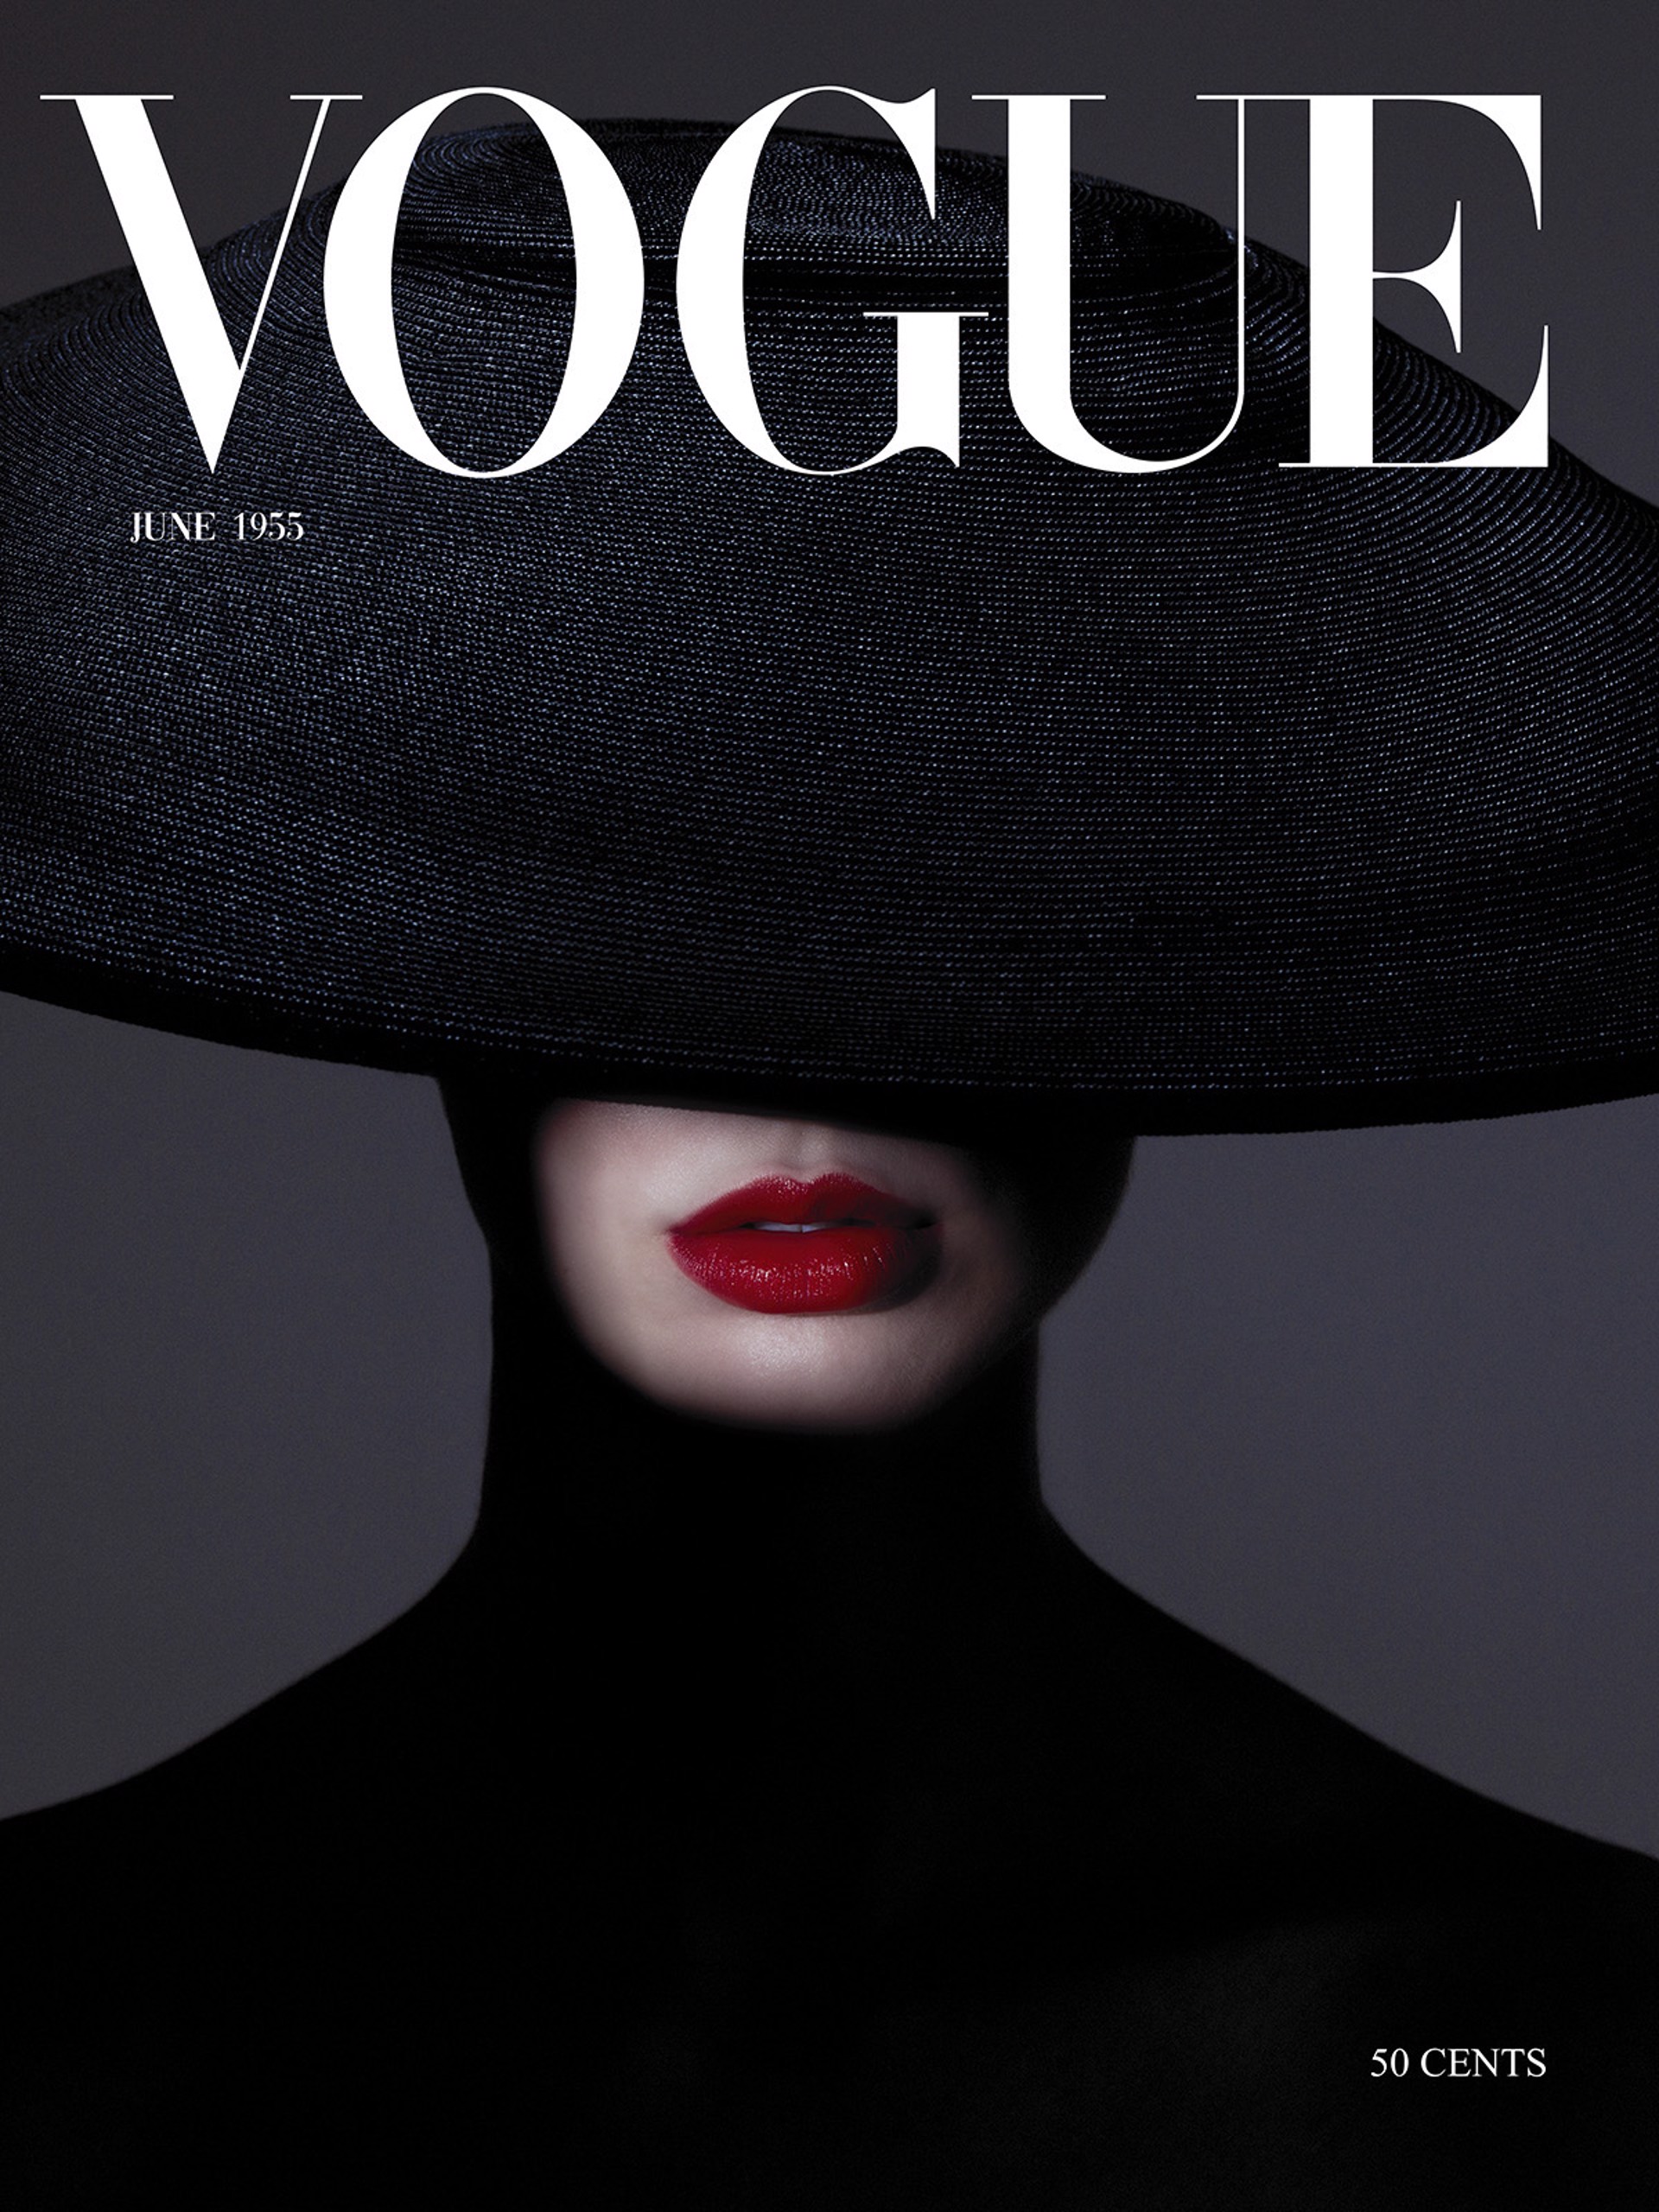 Vogue by Tyler Shields